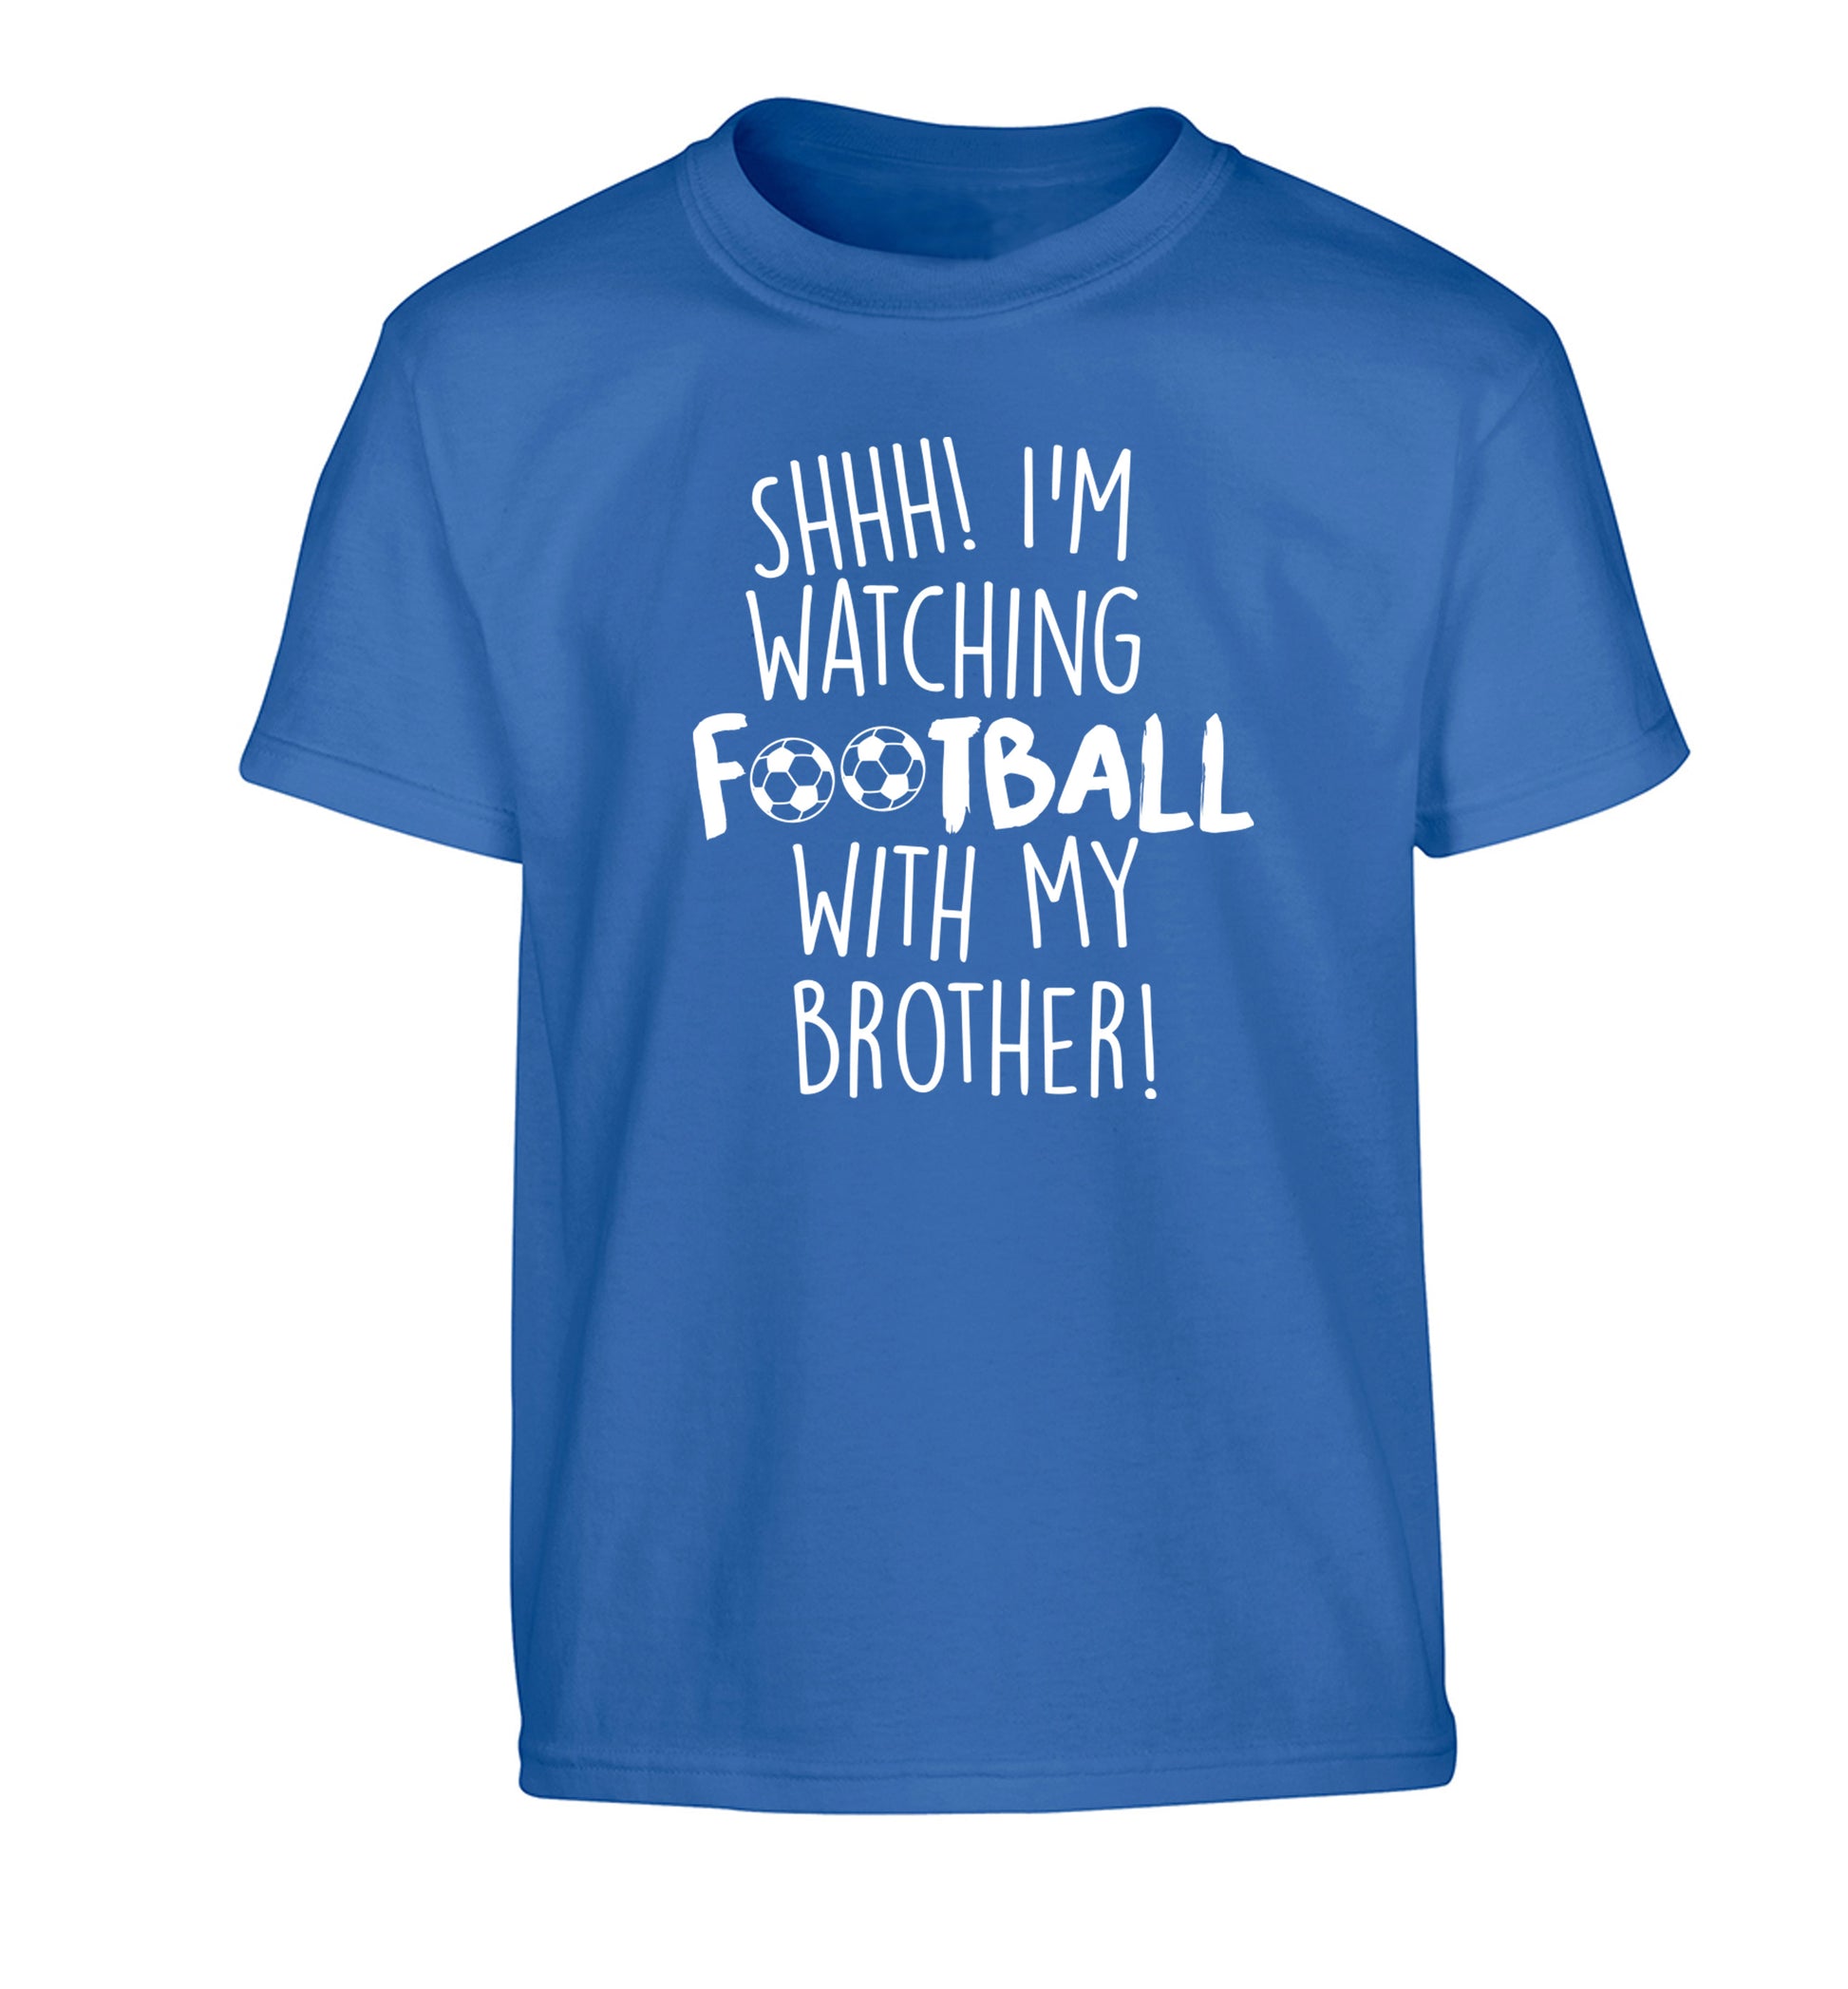 Shhh I'm watching football with my brother Children's blue Tshirt 12-14 Years